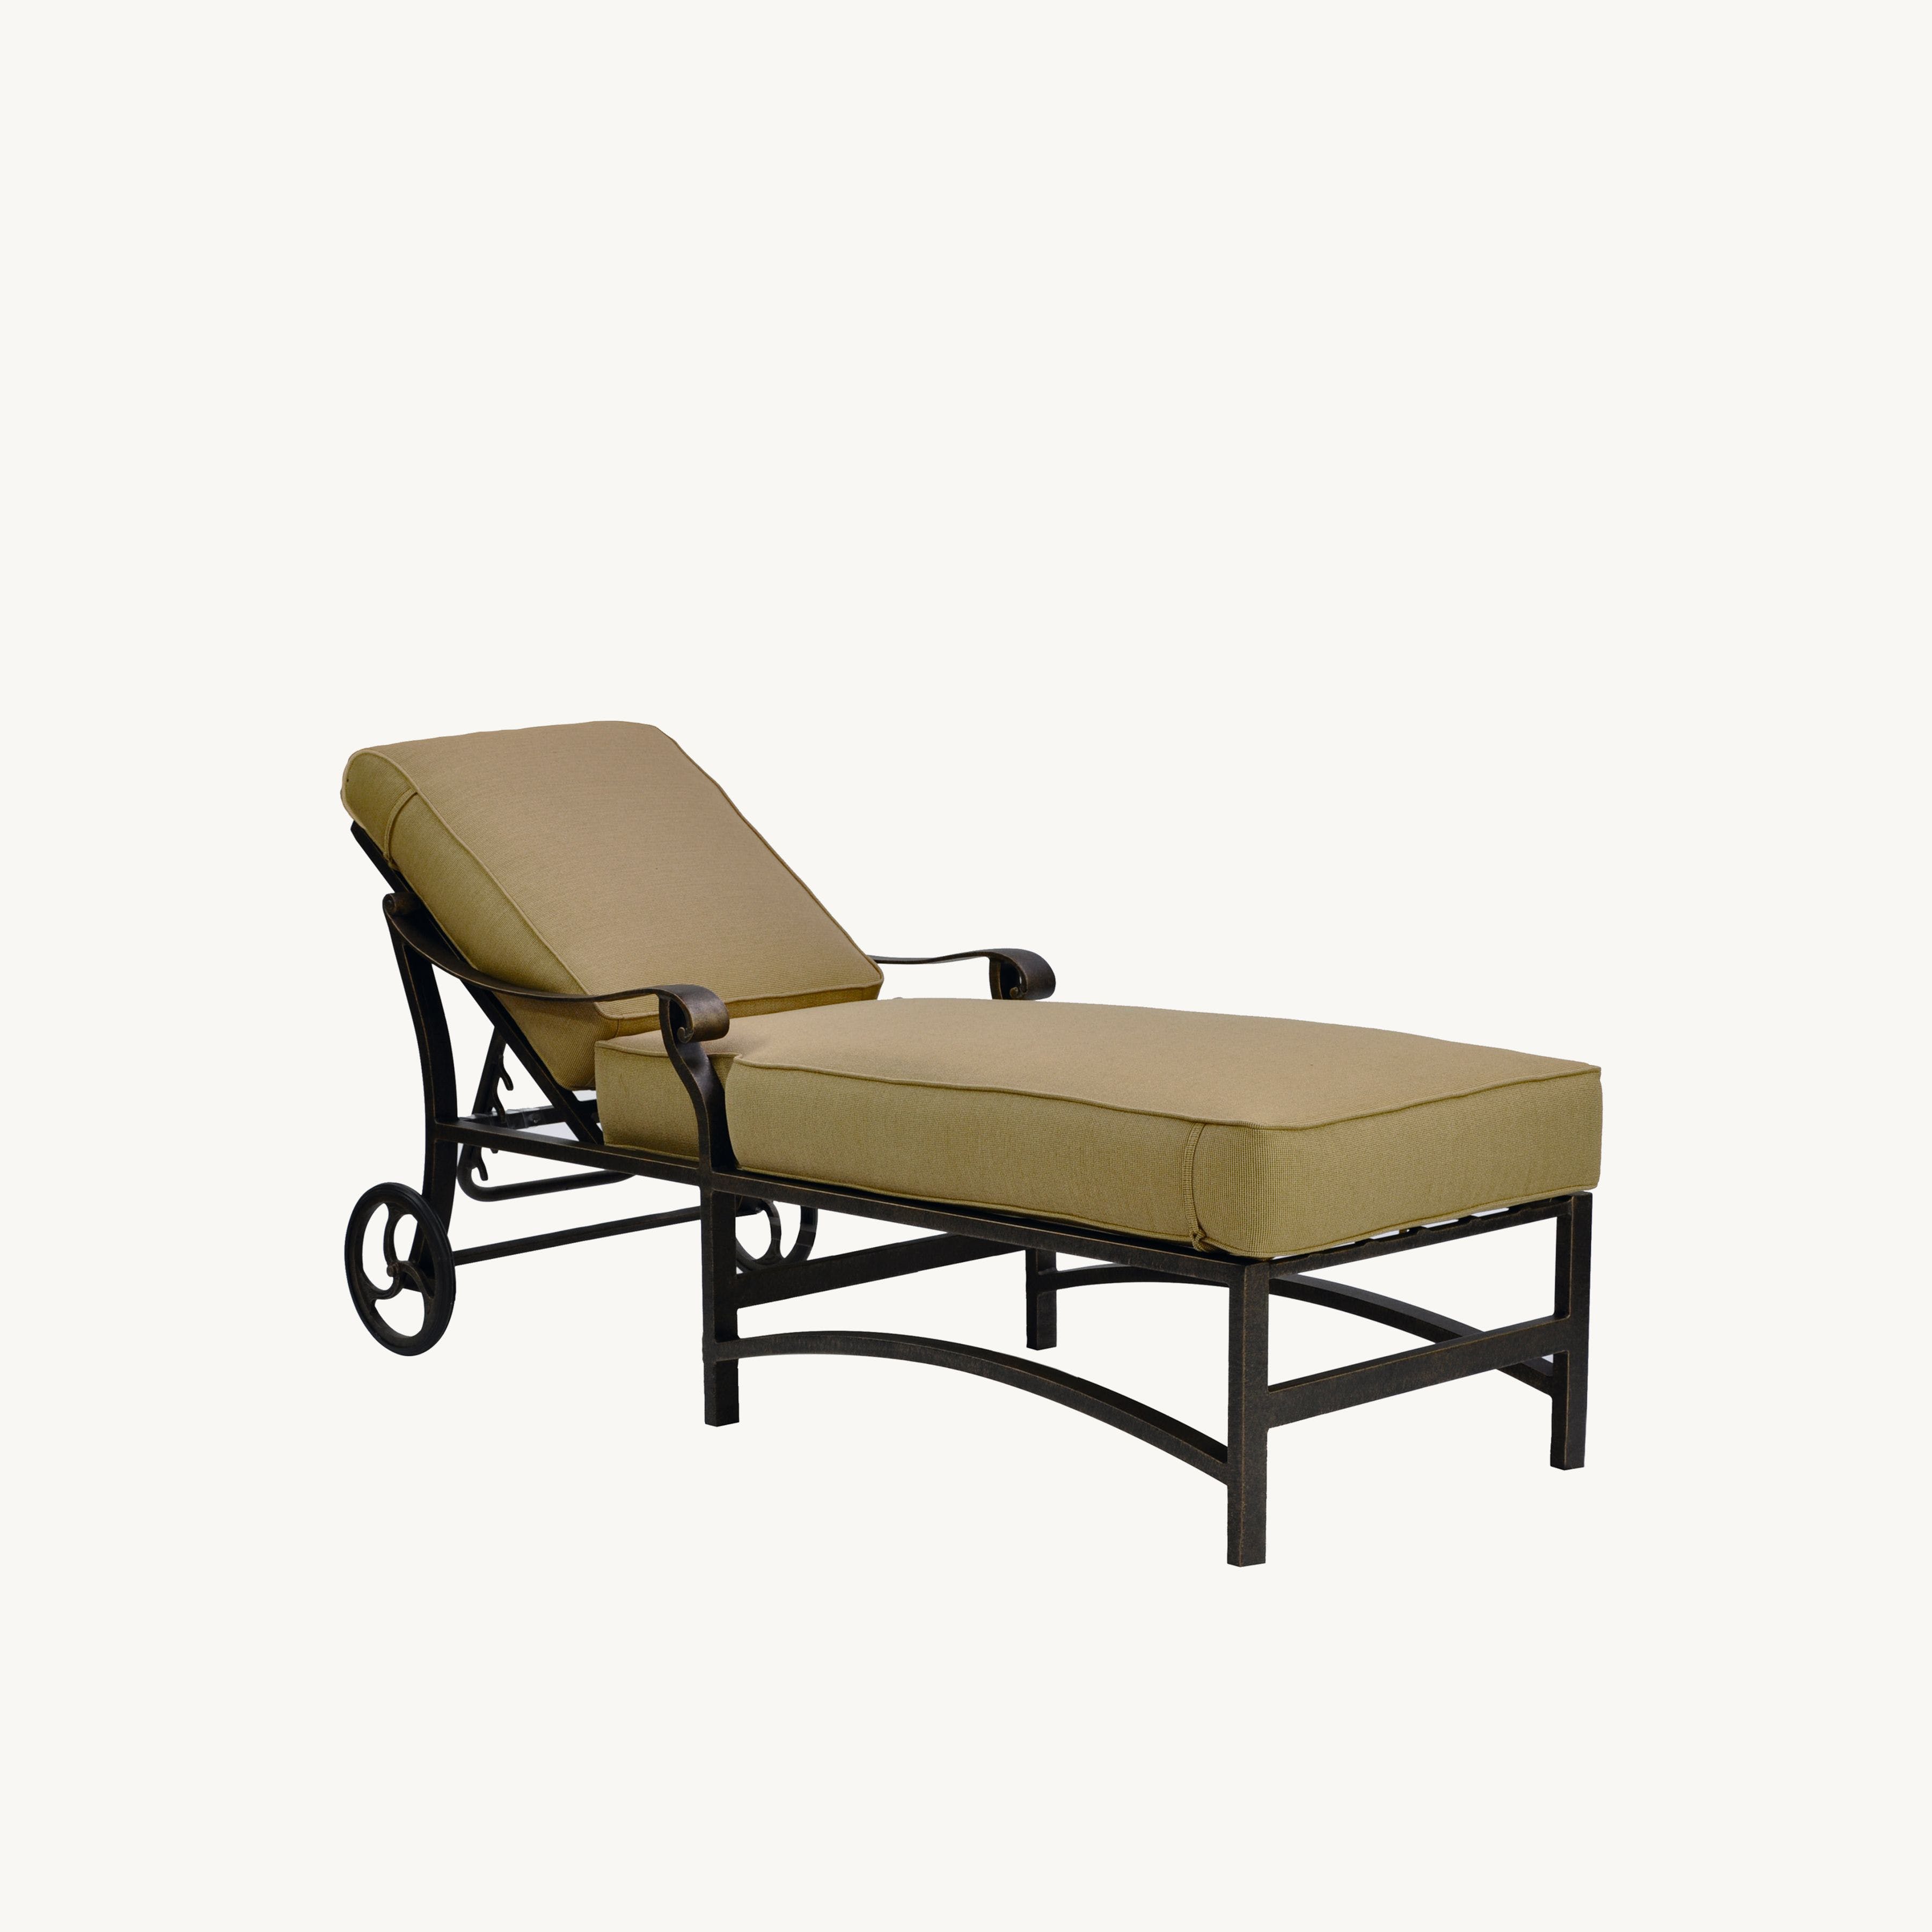 Madrid Adjustable Cushioned Chaise Lounge By Castelle